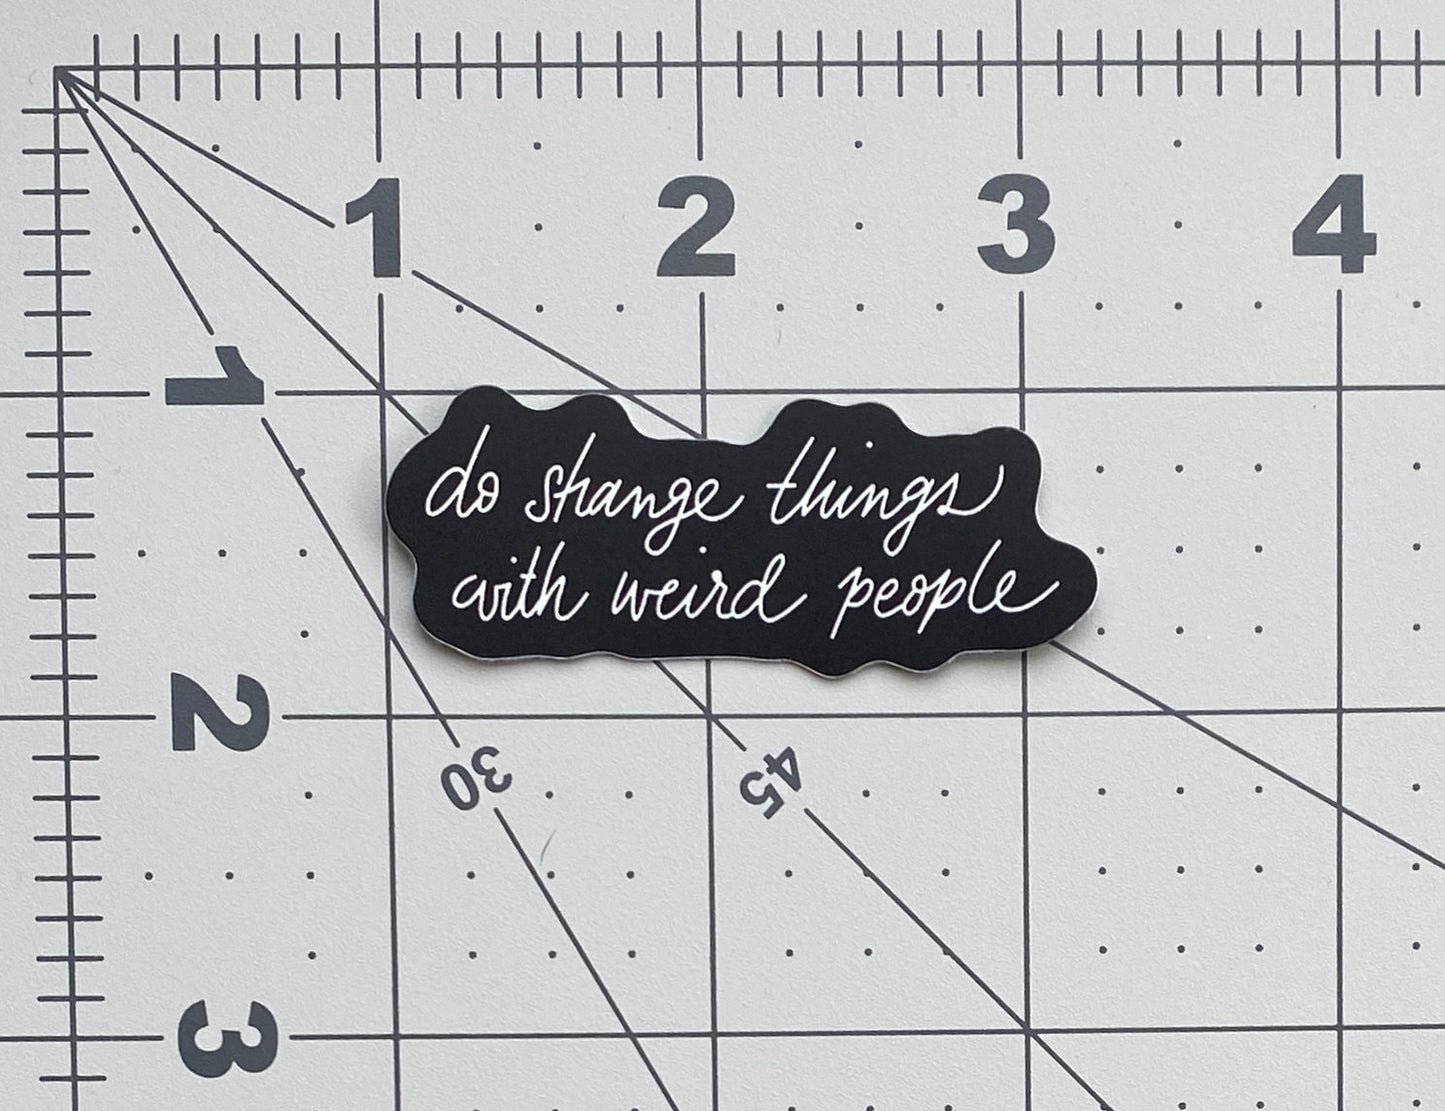 A black sticker with silver lettering that says "do strange things with weird people" against a ruled background to show size.